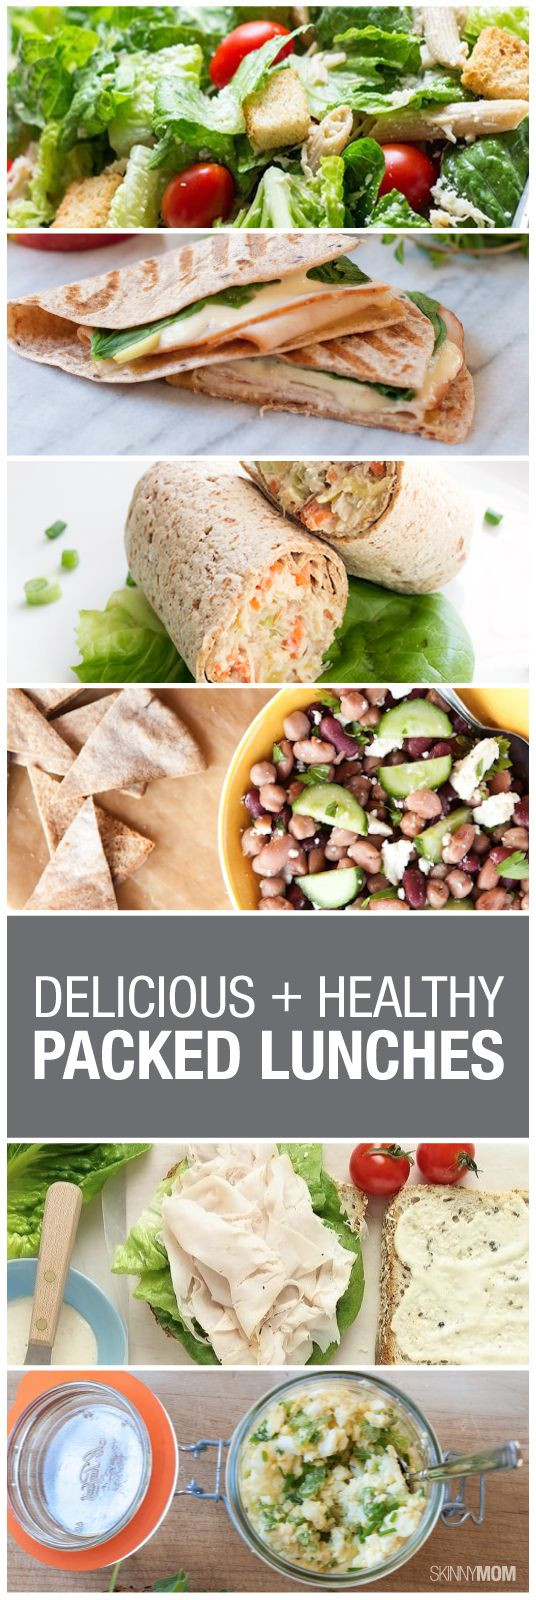 Healthy Portable Lunches
 Skinny Brown Bag Top 10 Options for an Easy Portable